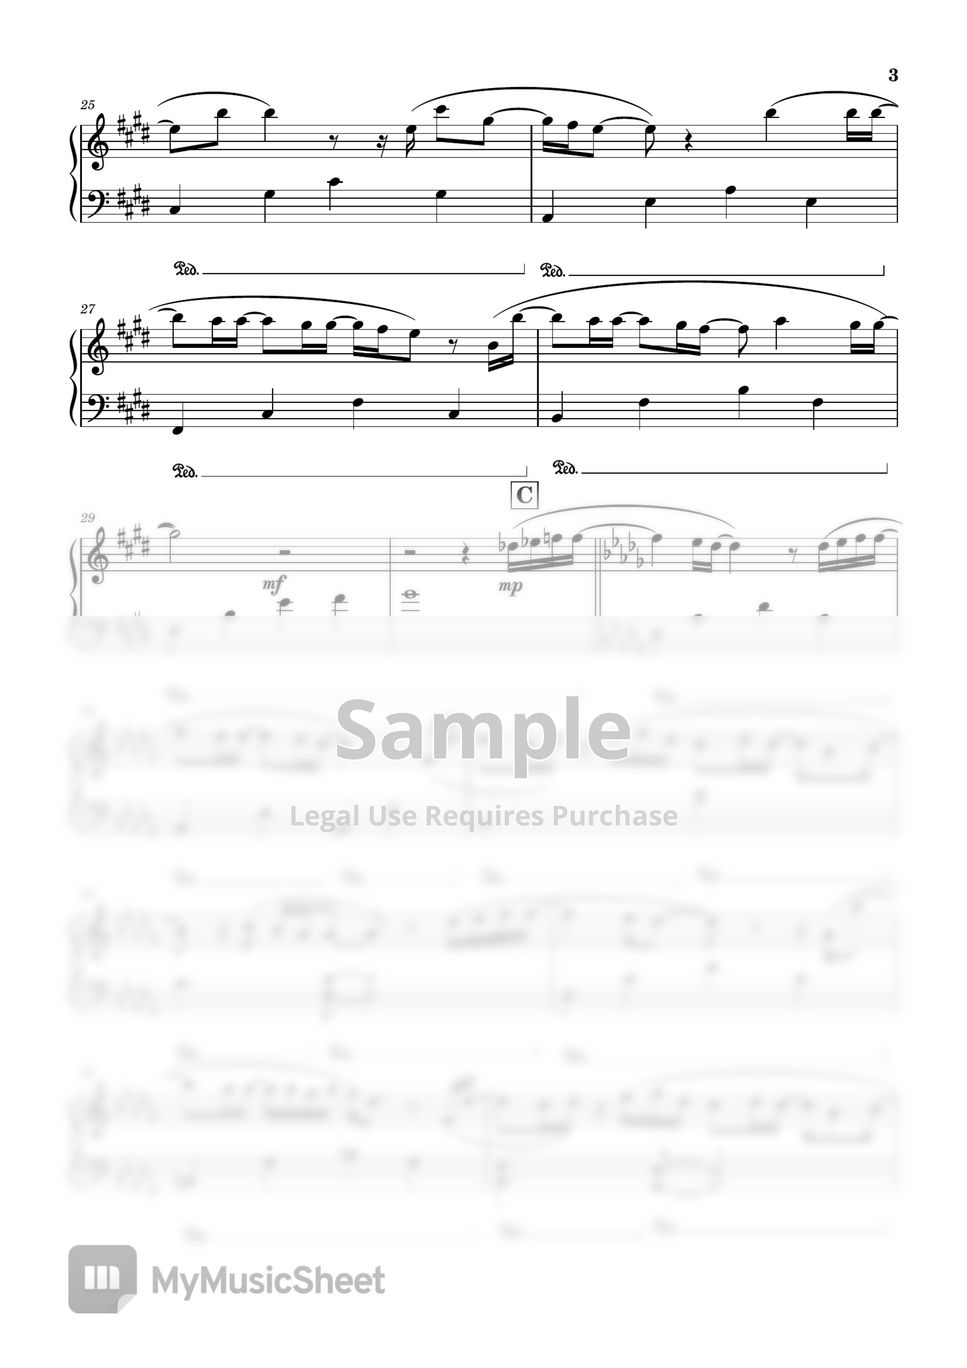 Where the wind blows – Ado (One Piece Film Red OST) Sheet music